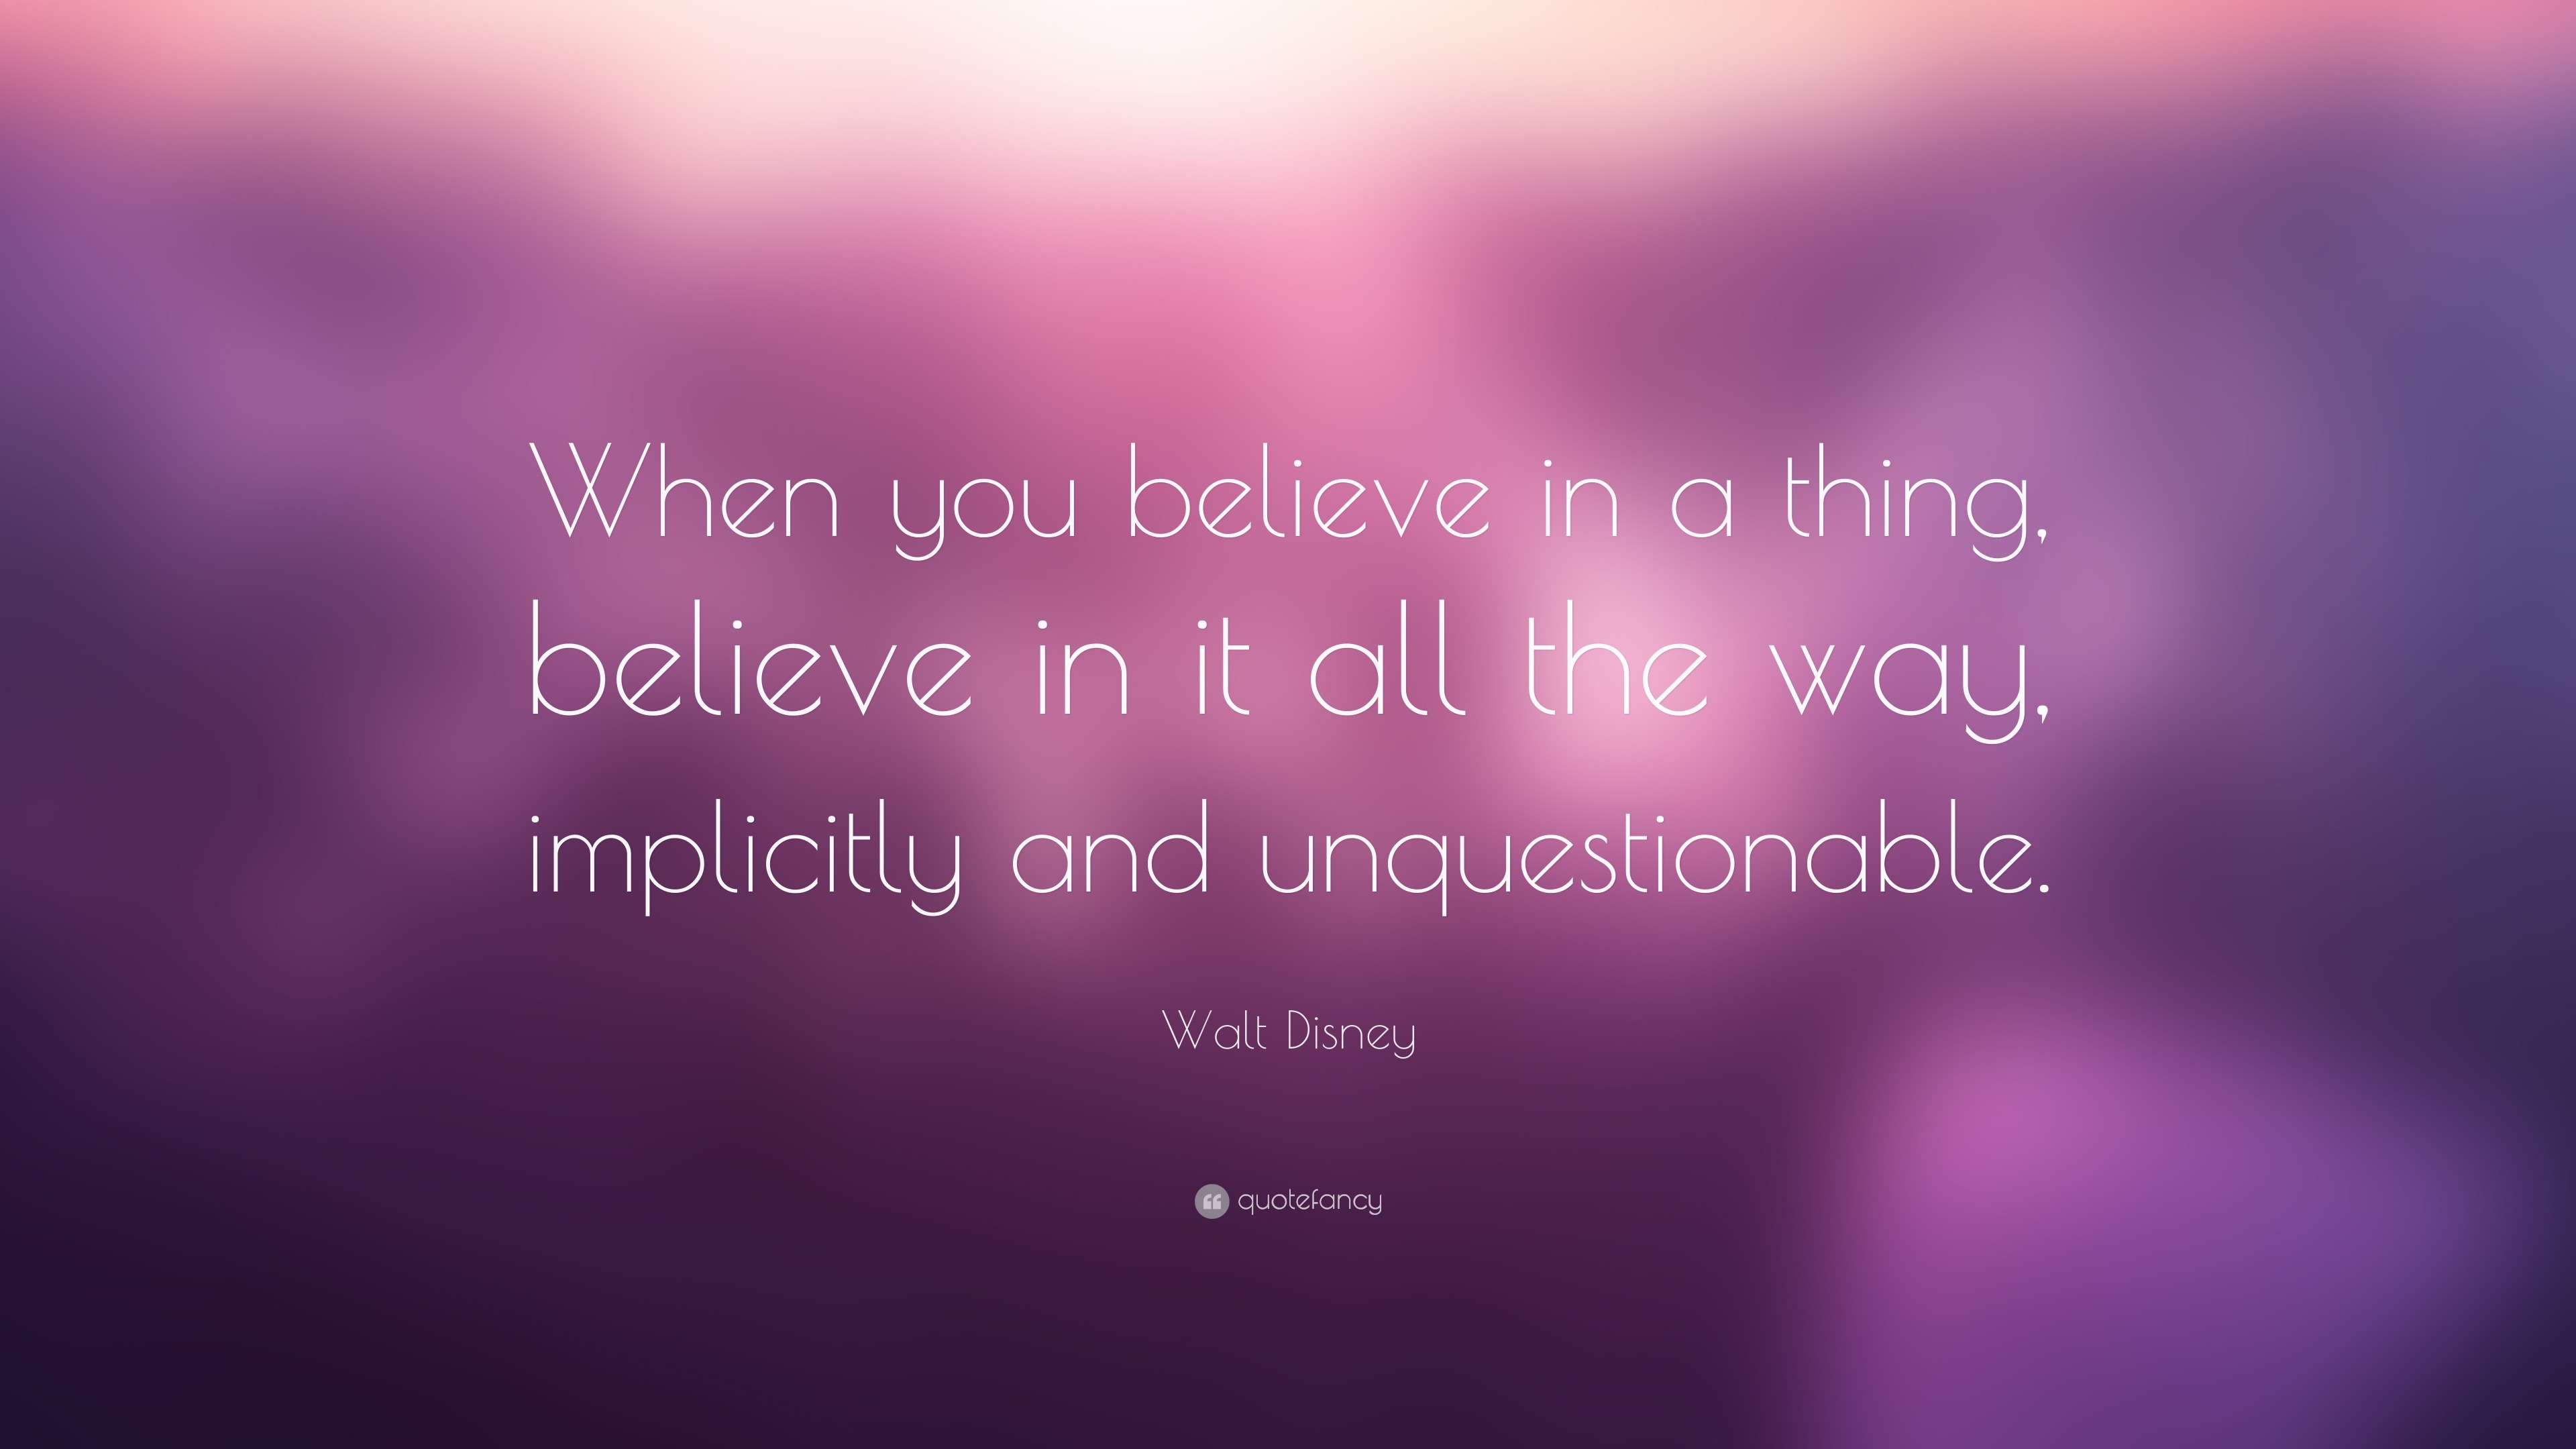 Walt Disney Quote: “When you believe in a thing, believe in it all the ...